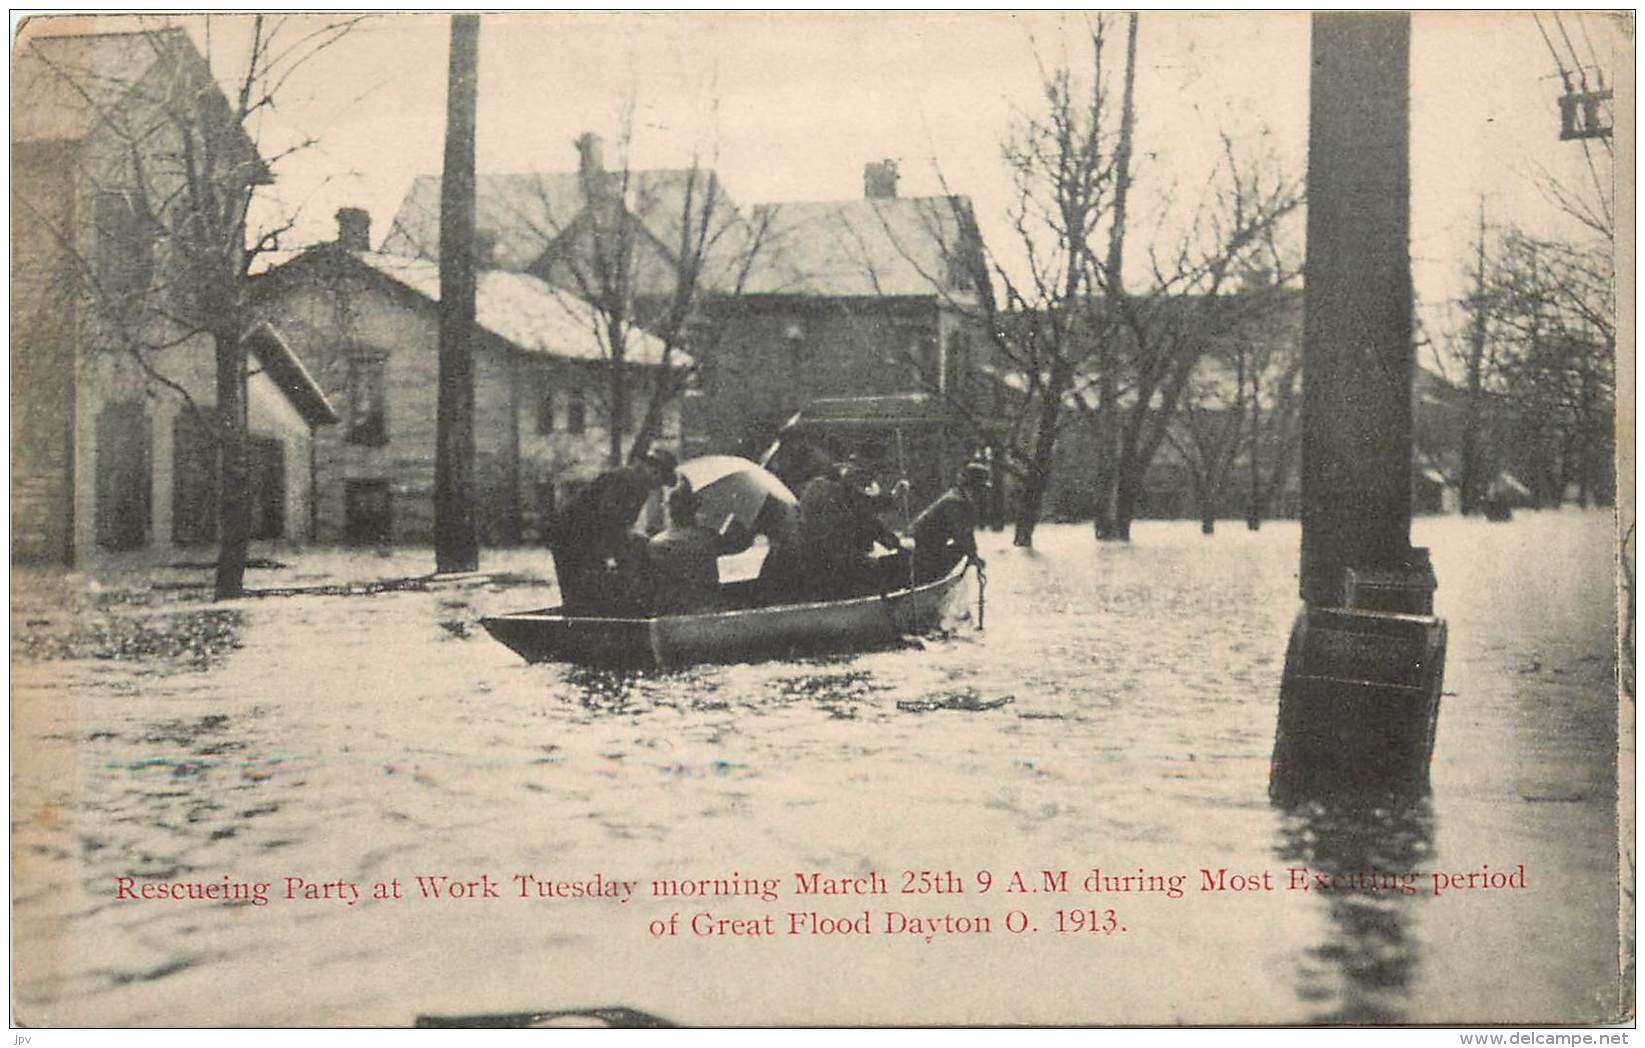 RESCUEING PARTY AT WORK TUESDAY MORNING DURING MOST EXCITING PERIOD OF GREAT FLOOD DAYTON . O . 1913. - Dayton